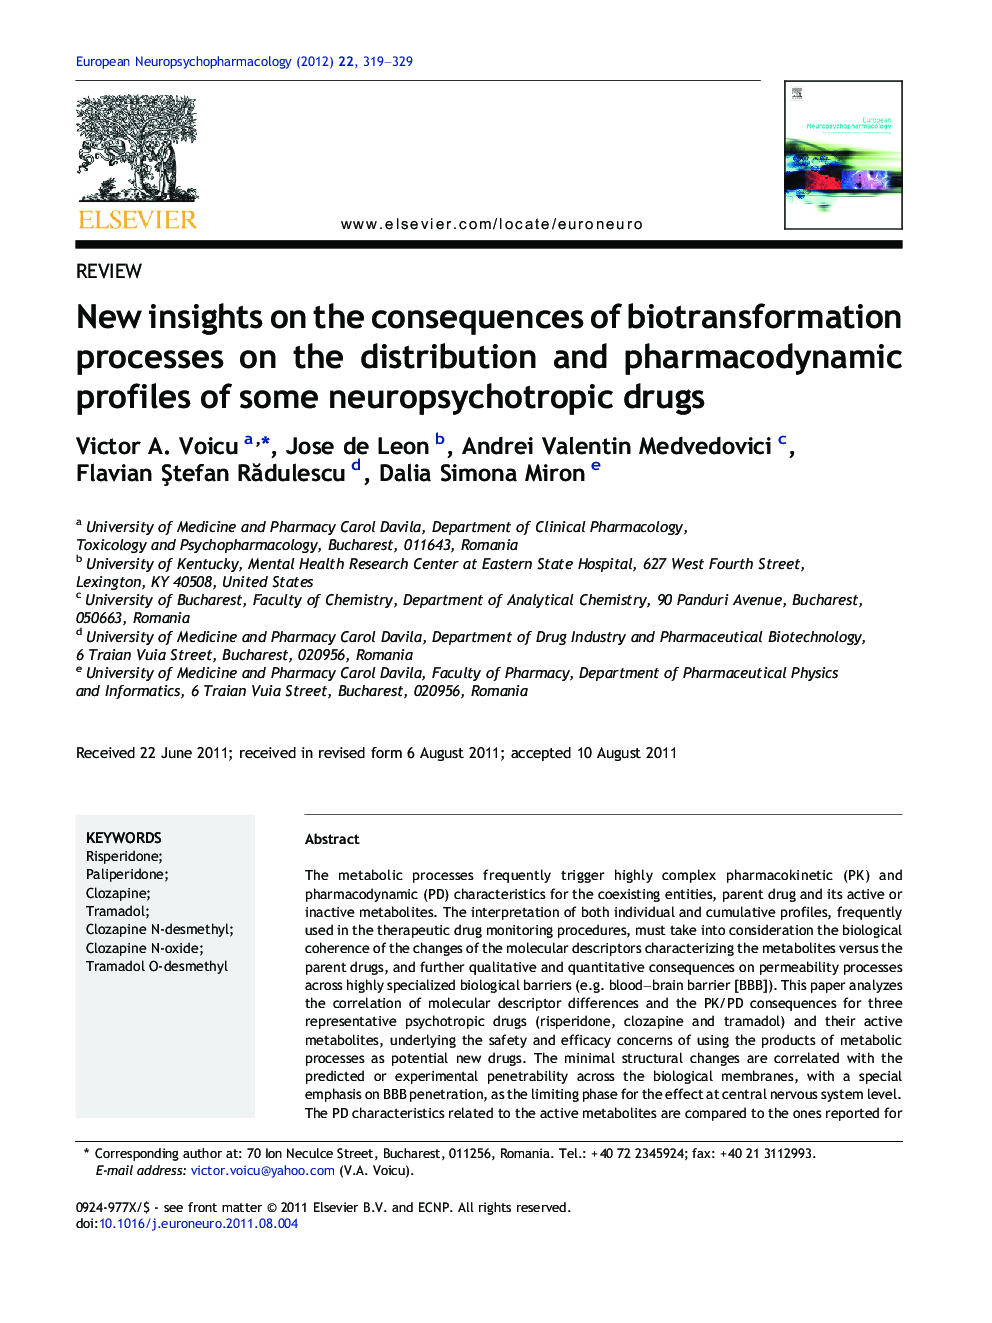 New insights on the consequences of biotransformation processes on the distribution and pharmacodynamic profiles of some neuropsychotropic drugs